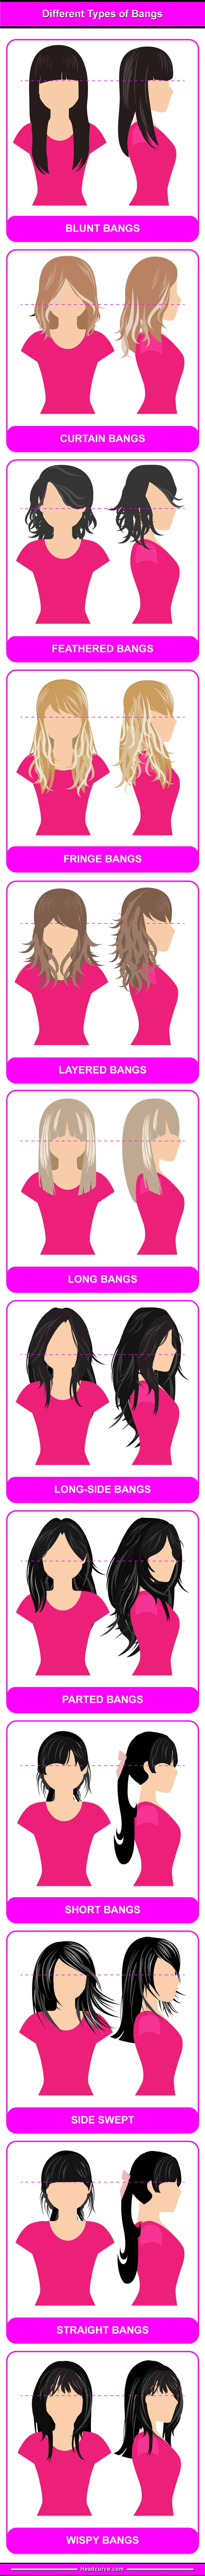 Chart setting out the different types of bangs for women